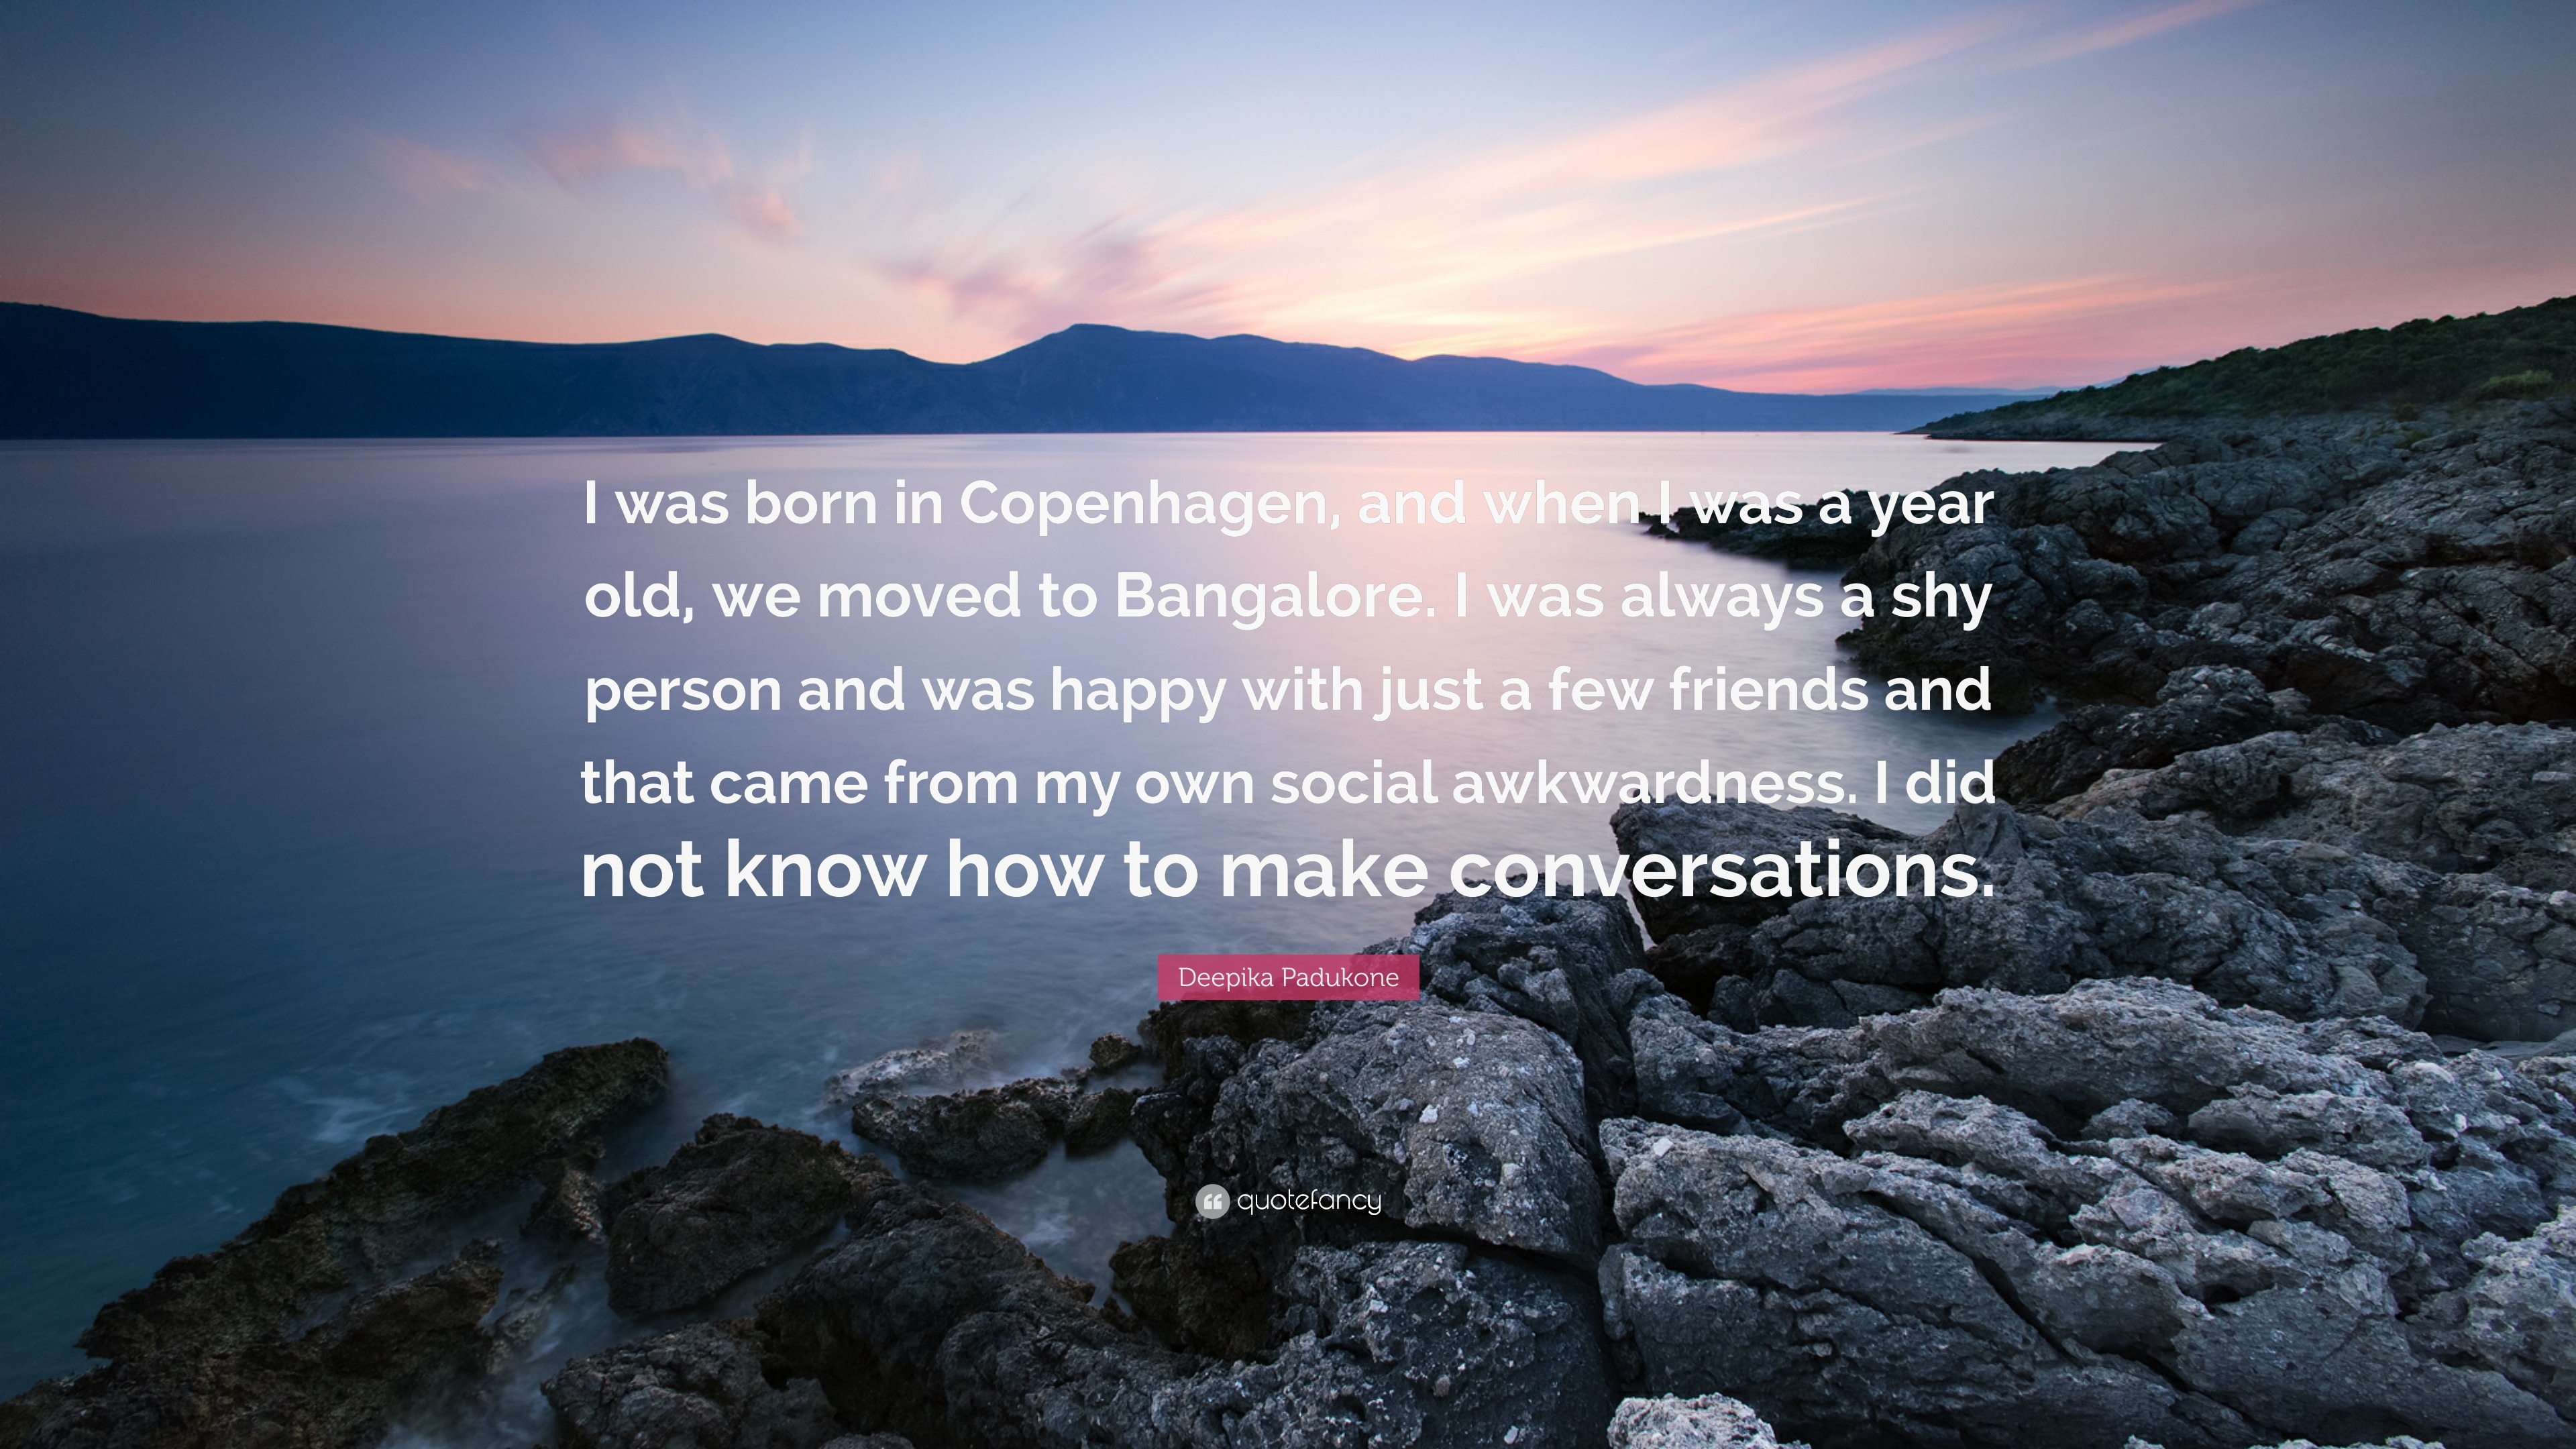 Deepika Padukone Quote: “I was born in Copenhagen, and when I was a year  old, we moved to Bangalore. I was always a shy person and was happy with...”